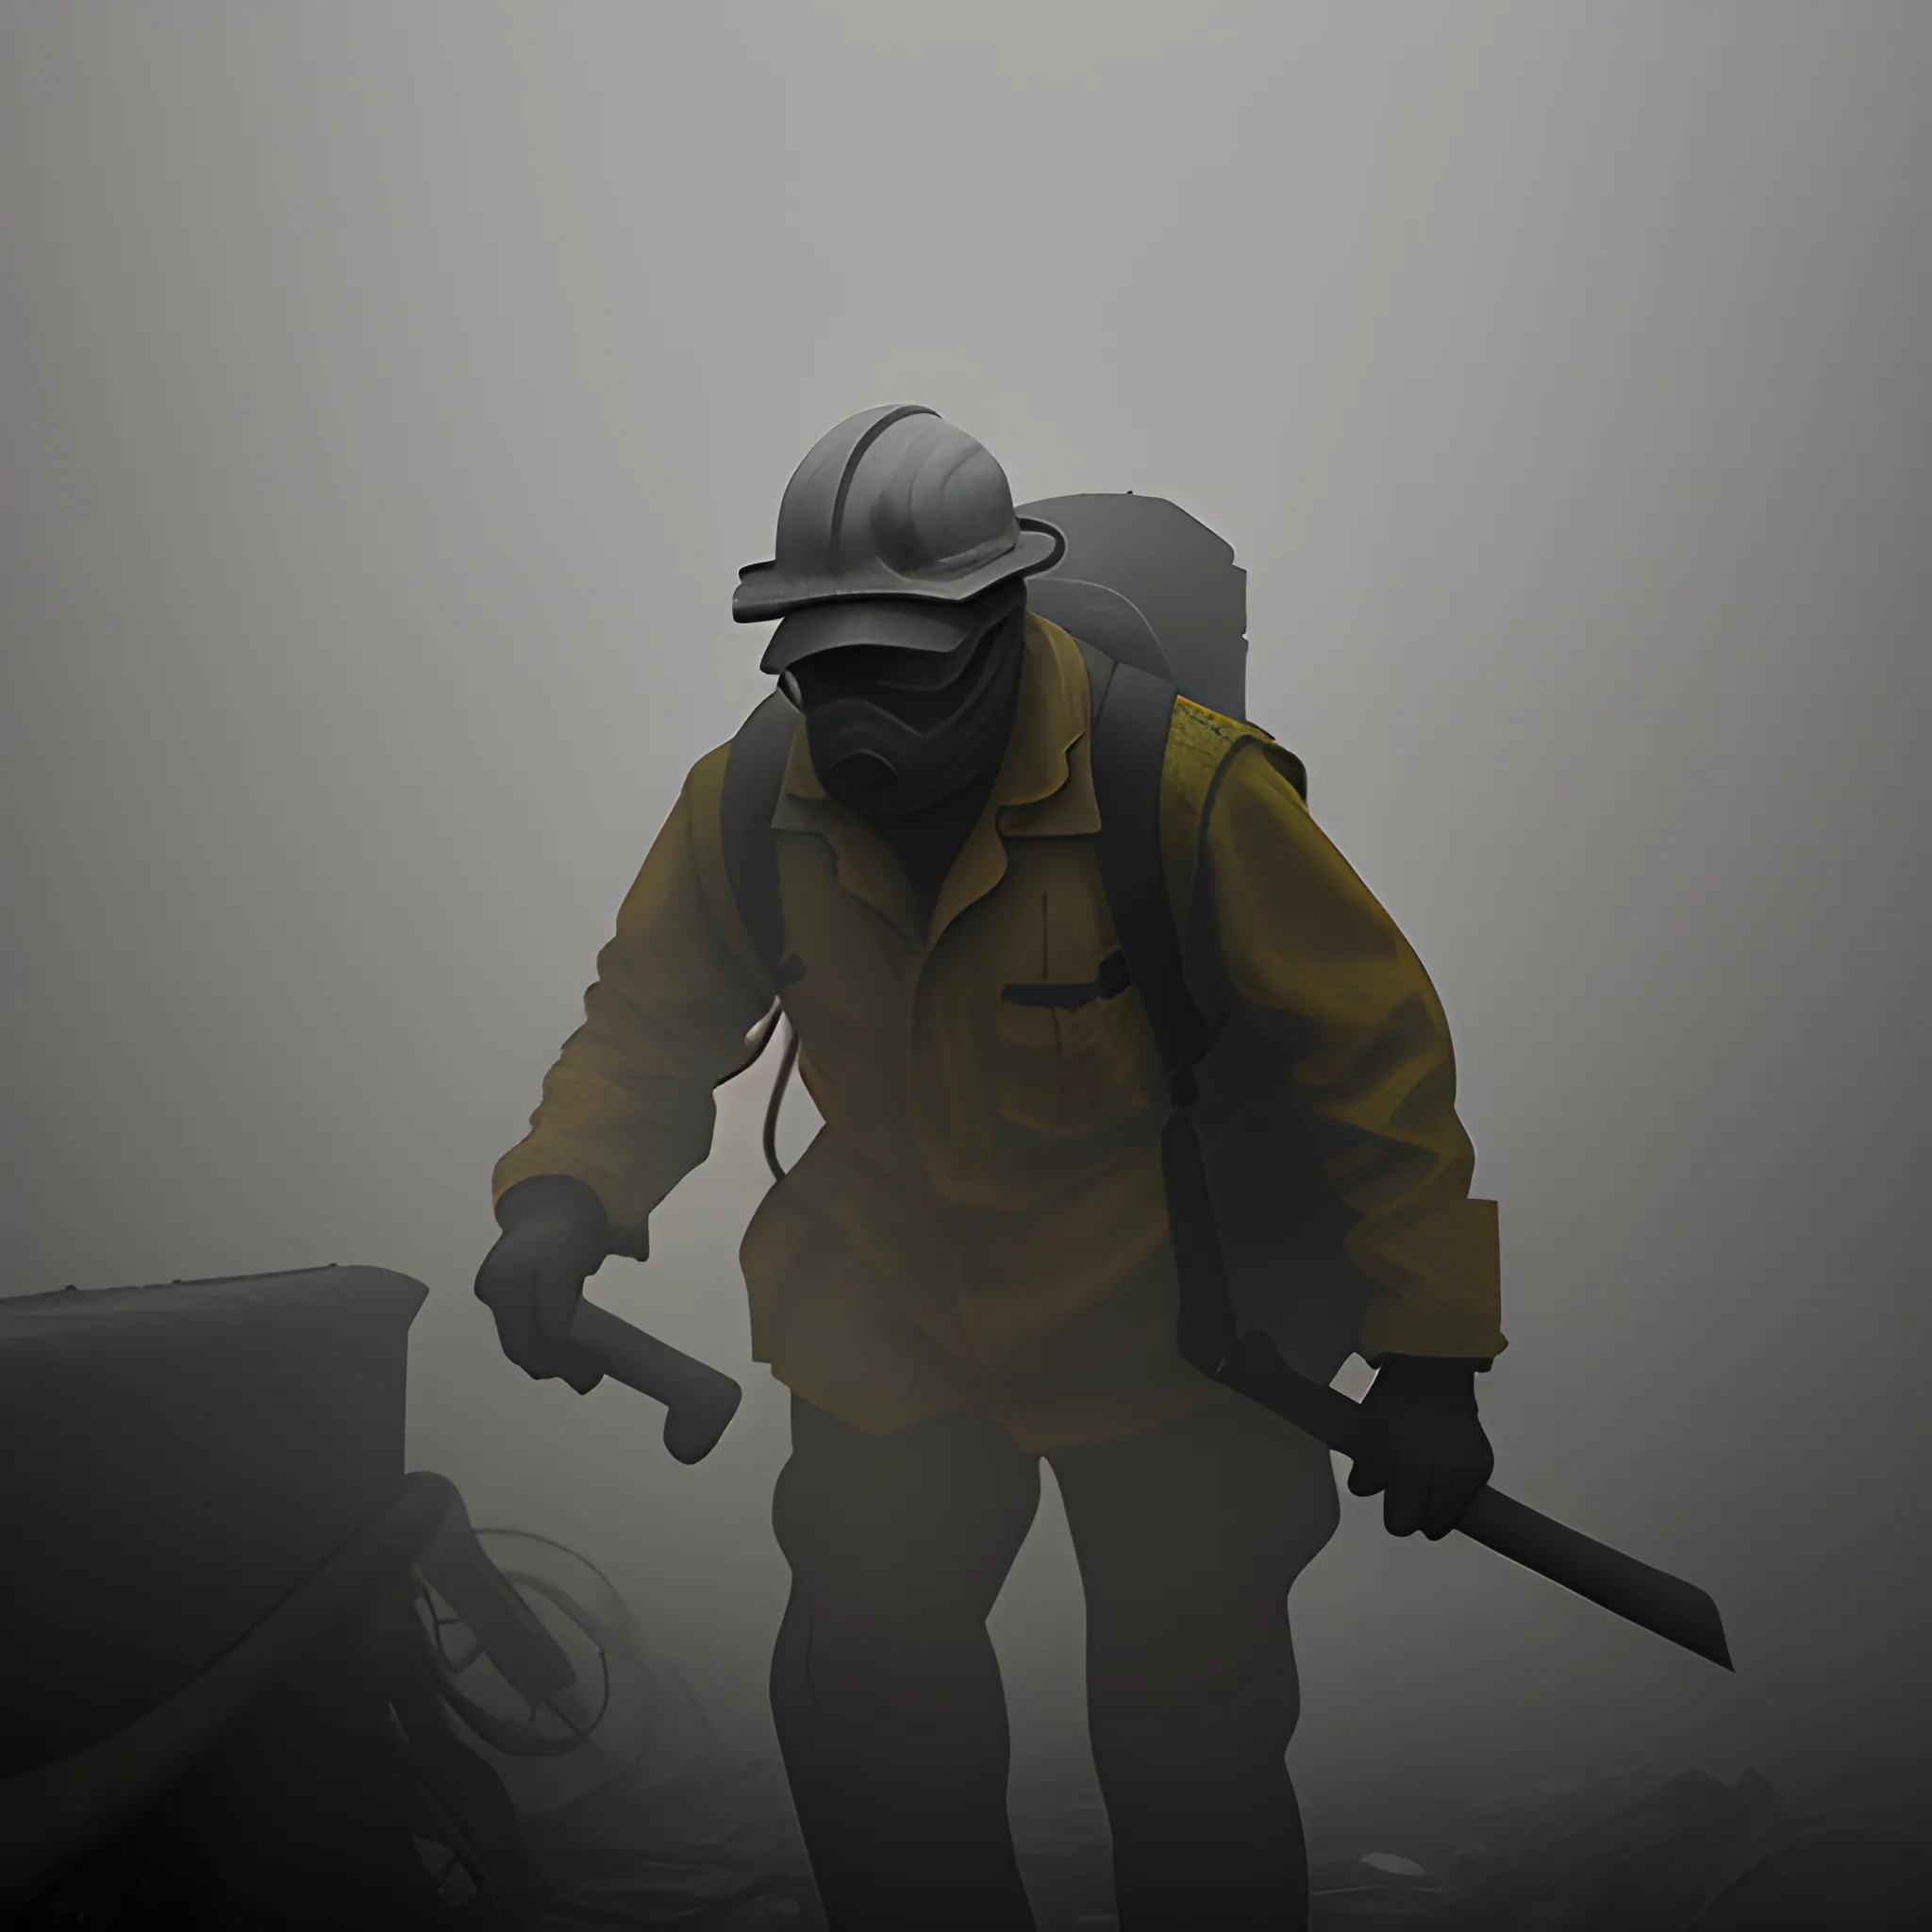 Illustrate a worker navigating through thick fog on a hazardous path. Convey the struggle and difficulty of managing safety in this environment. Use subdued tones of grays and yellows to evoke a sense of danger and urgency.
